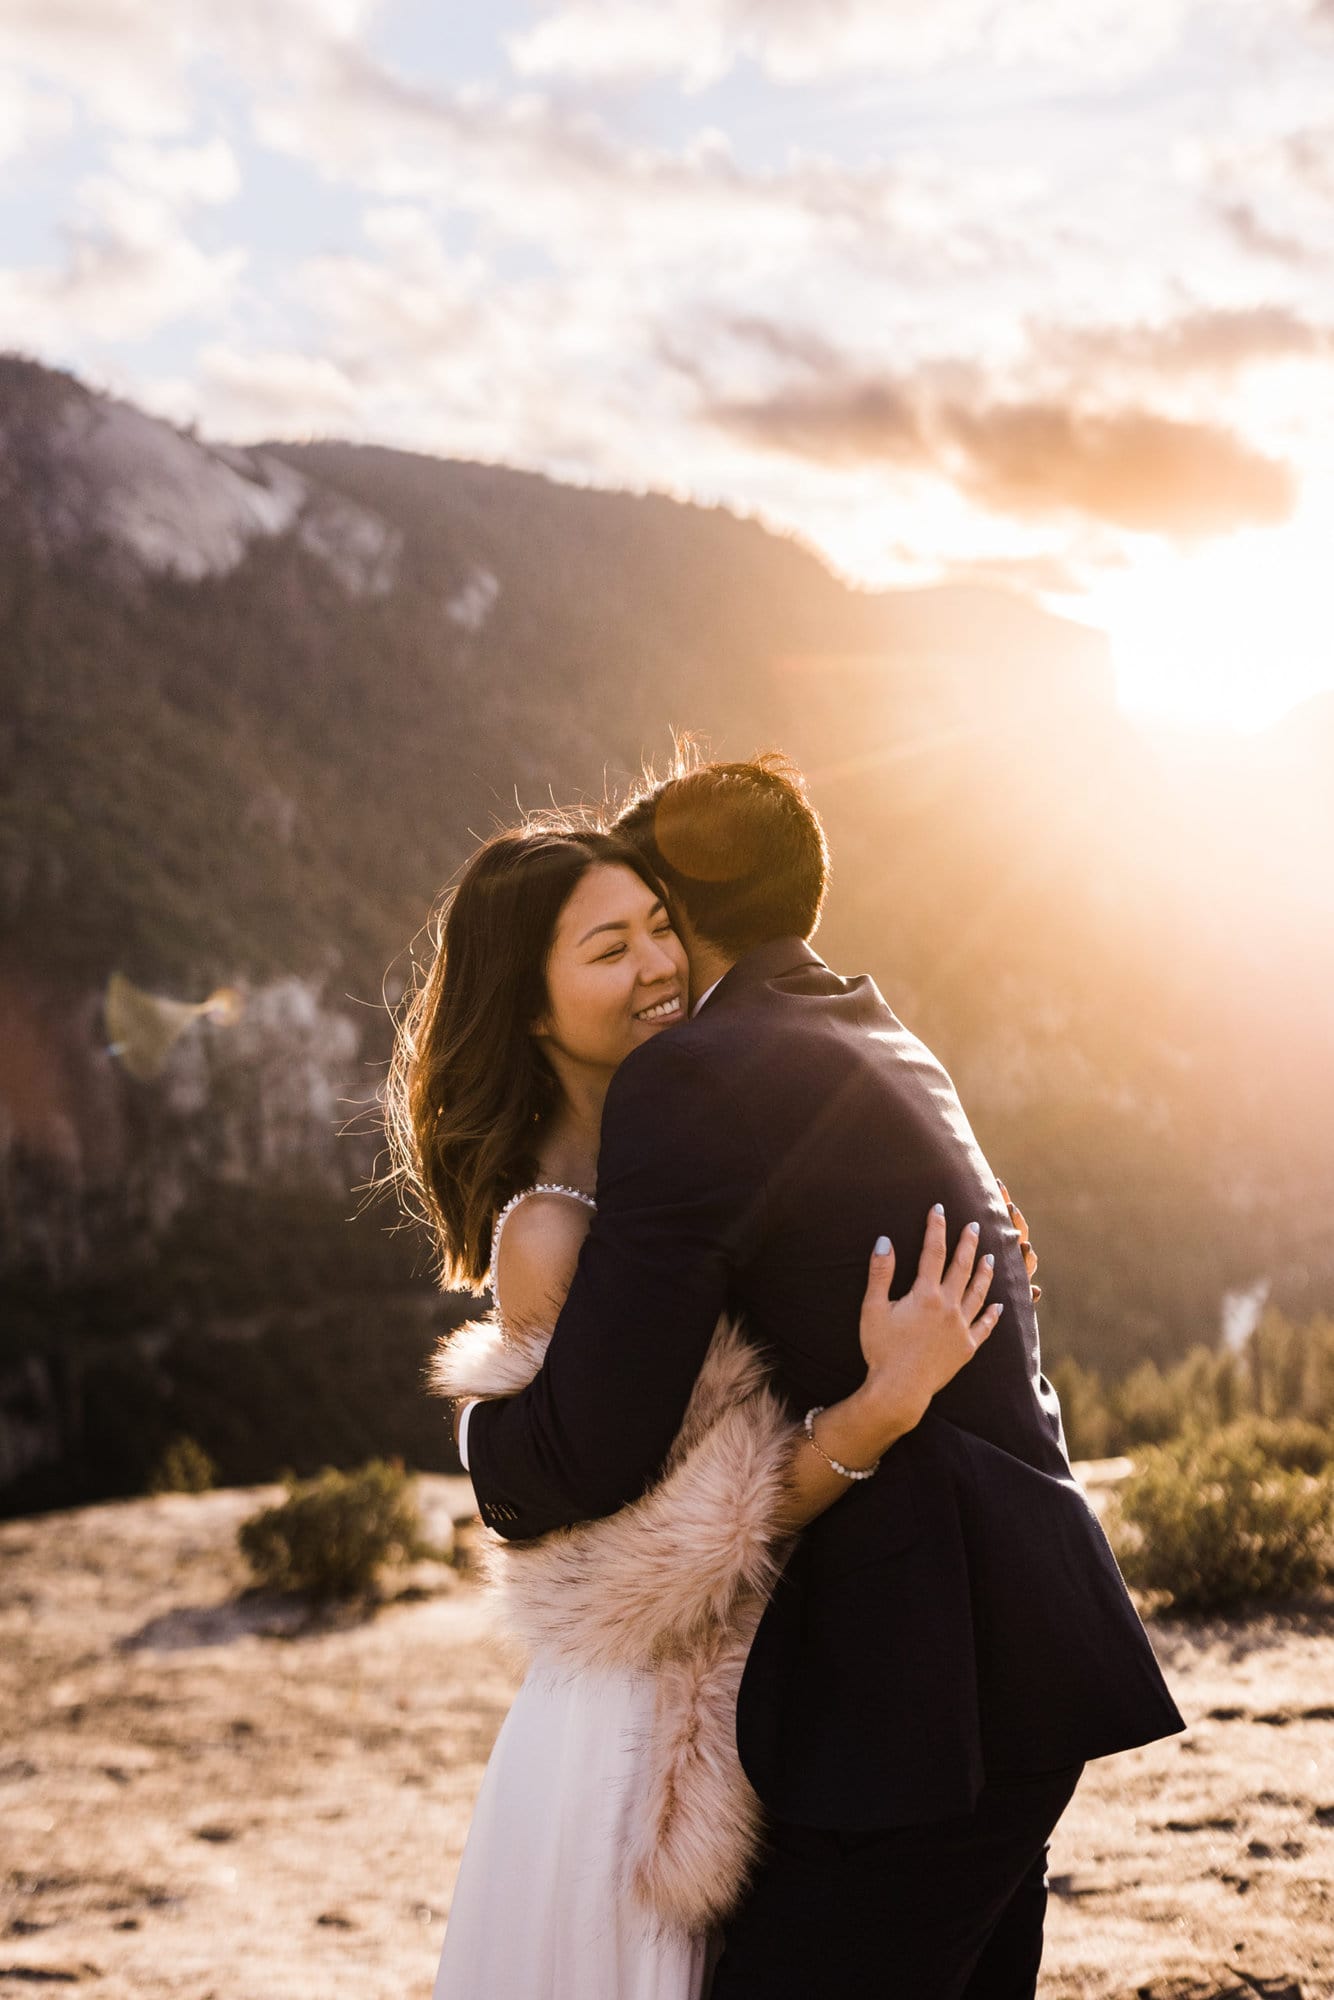 Spring is the perfect time for a Yosemite Valley Elopement. This couple enjoyed vistas, waterfalls, and meadows during their perfect elopement. 